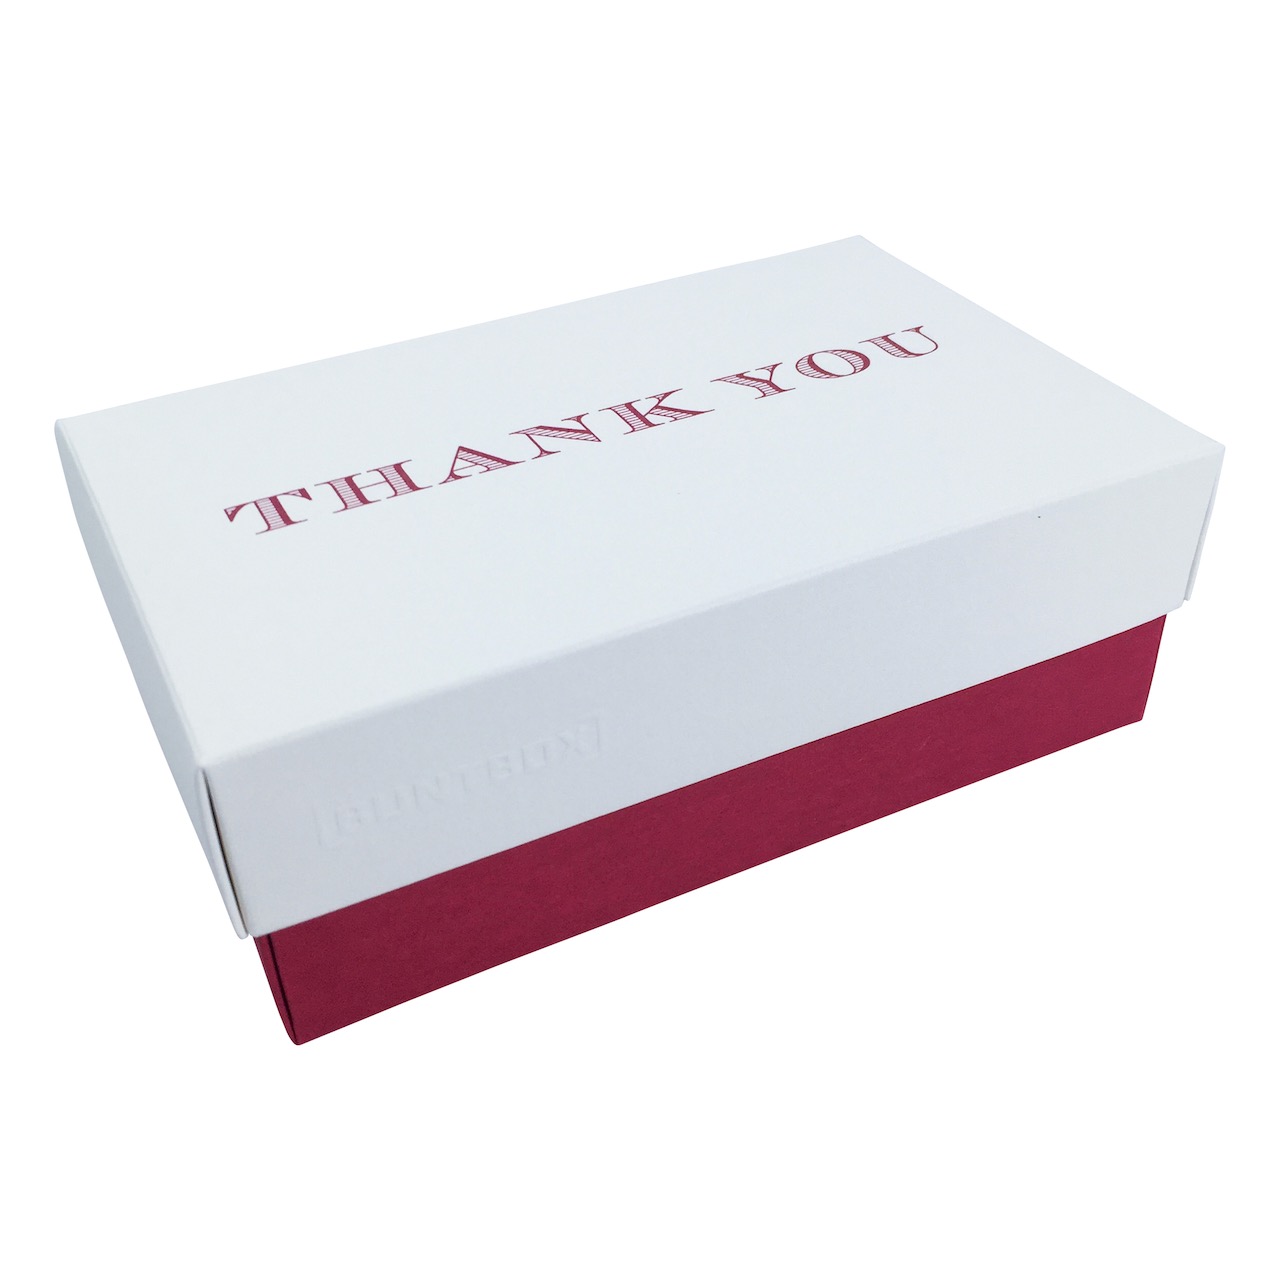 Buntbox S Fine Paper Thank You in Champagner-Bordeaux